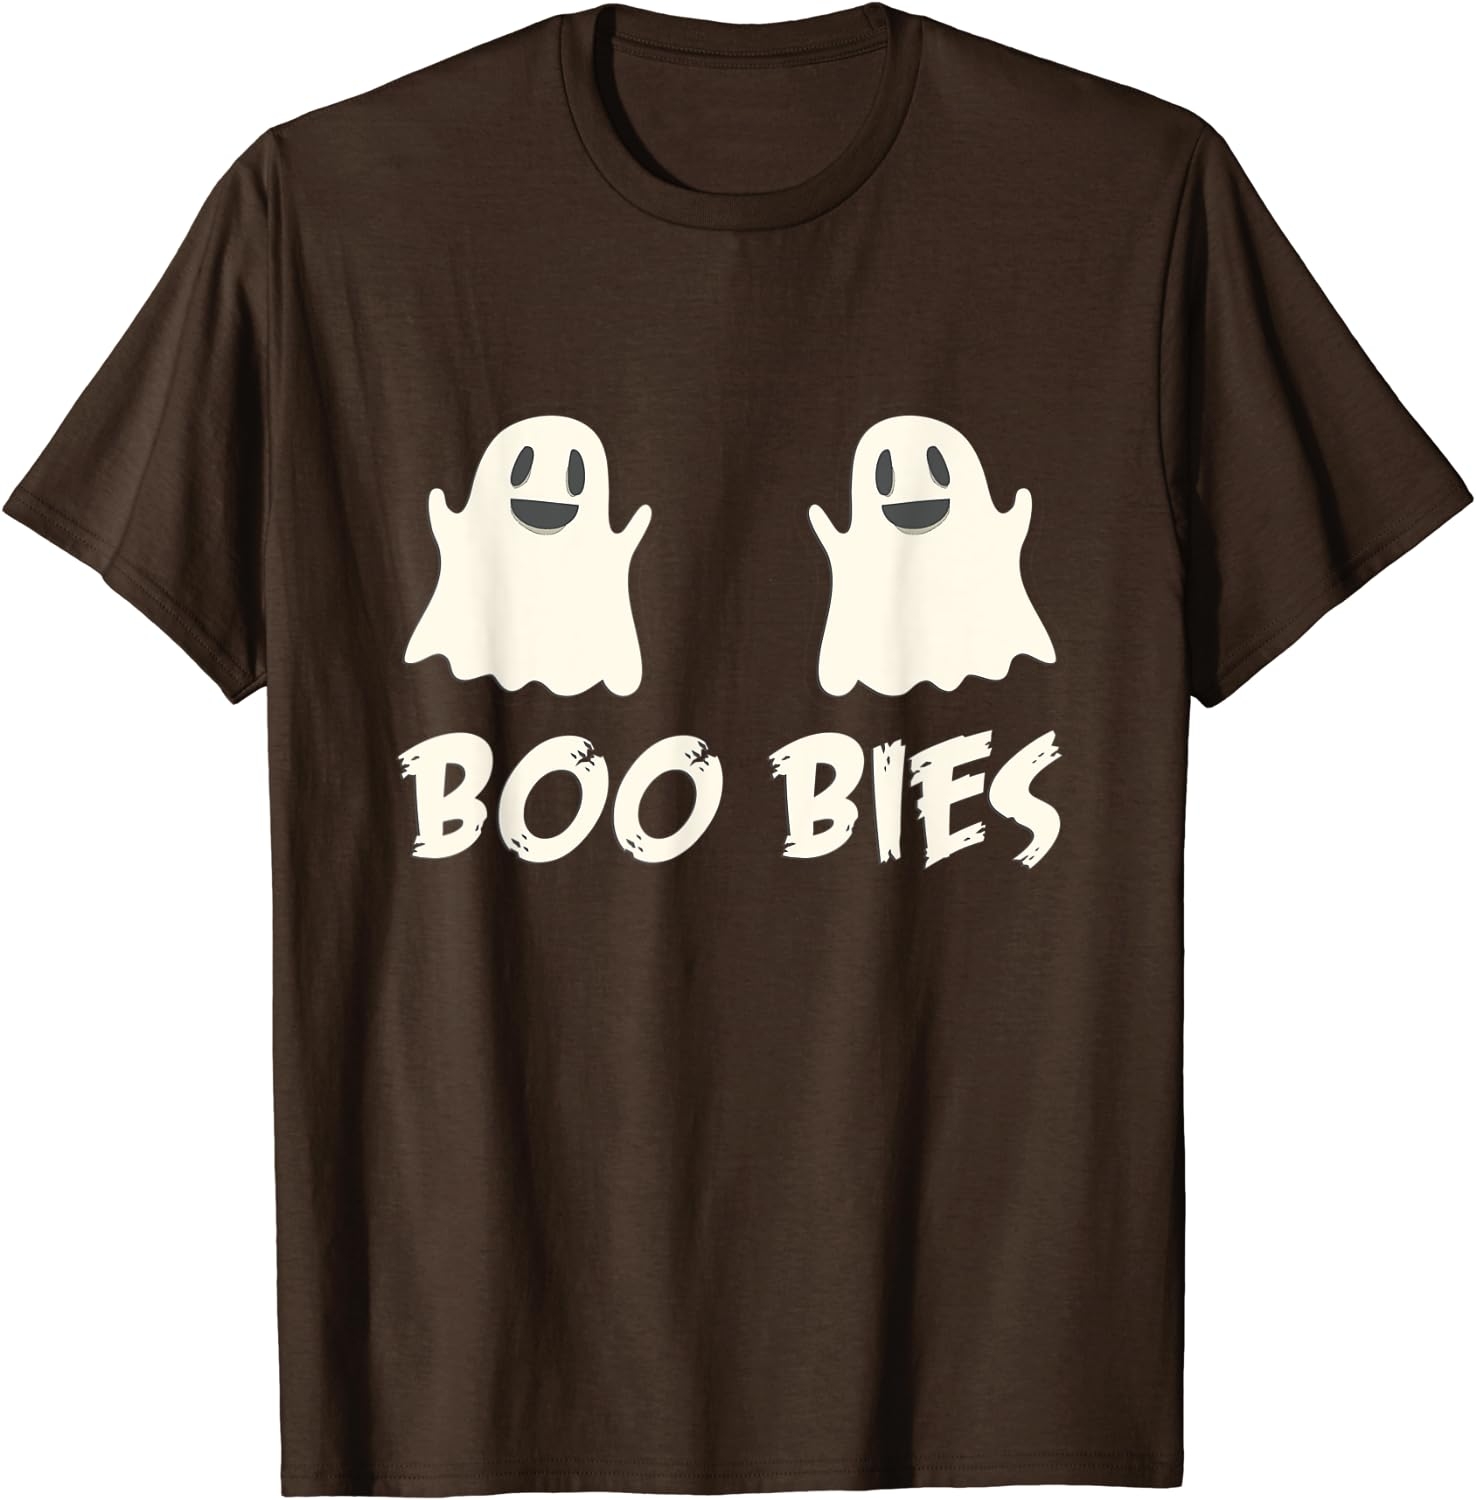 Say Boo Ghost Boo-bies Spooky Halloween T Shirt   price checker   price checker Description Gallery Reviews Variations